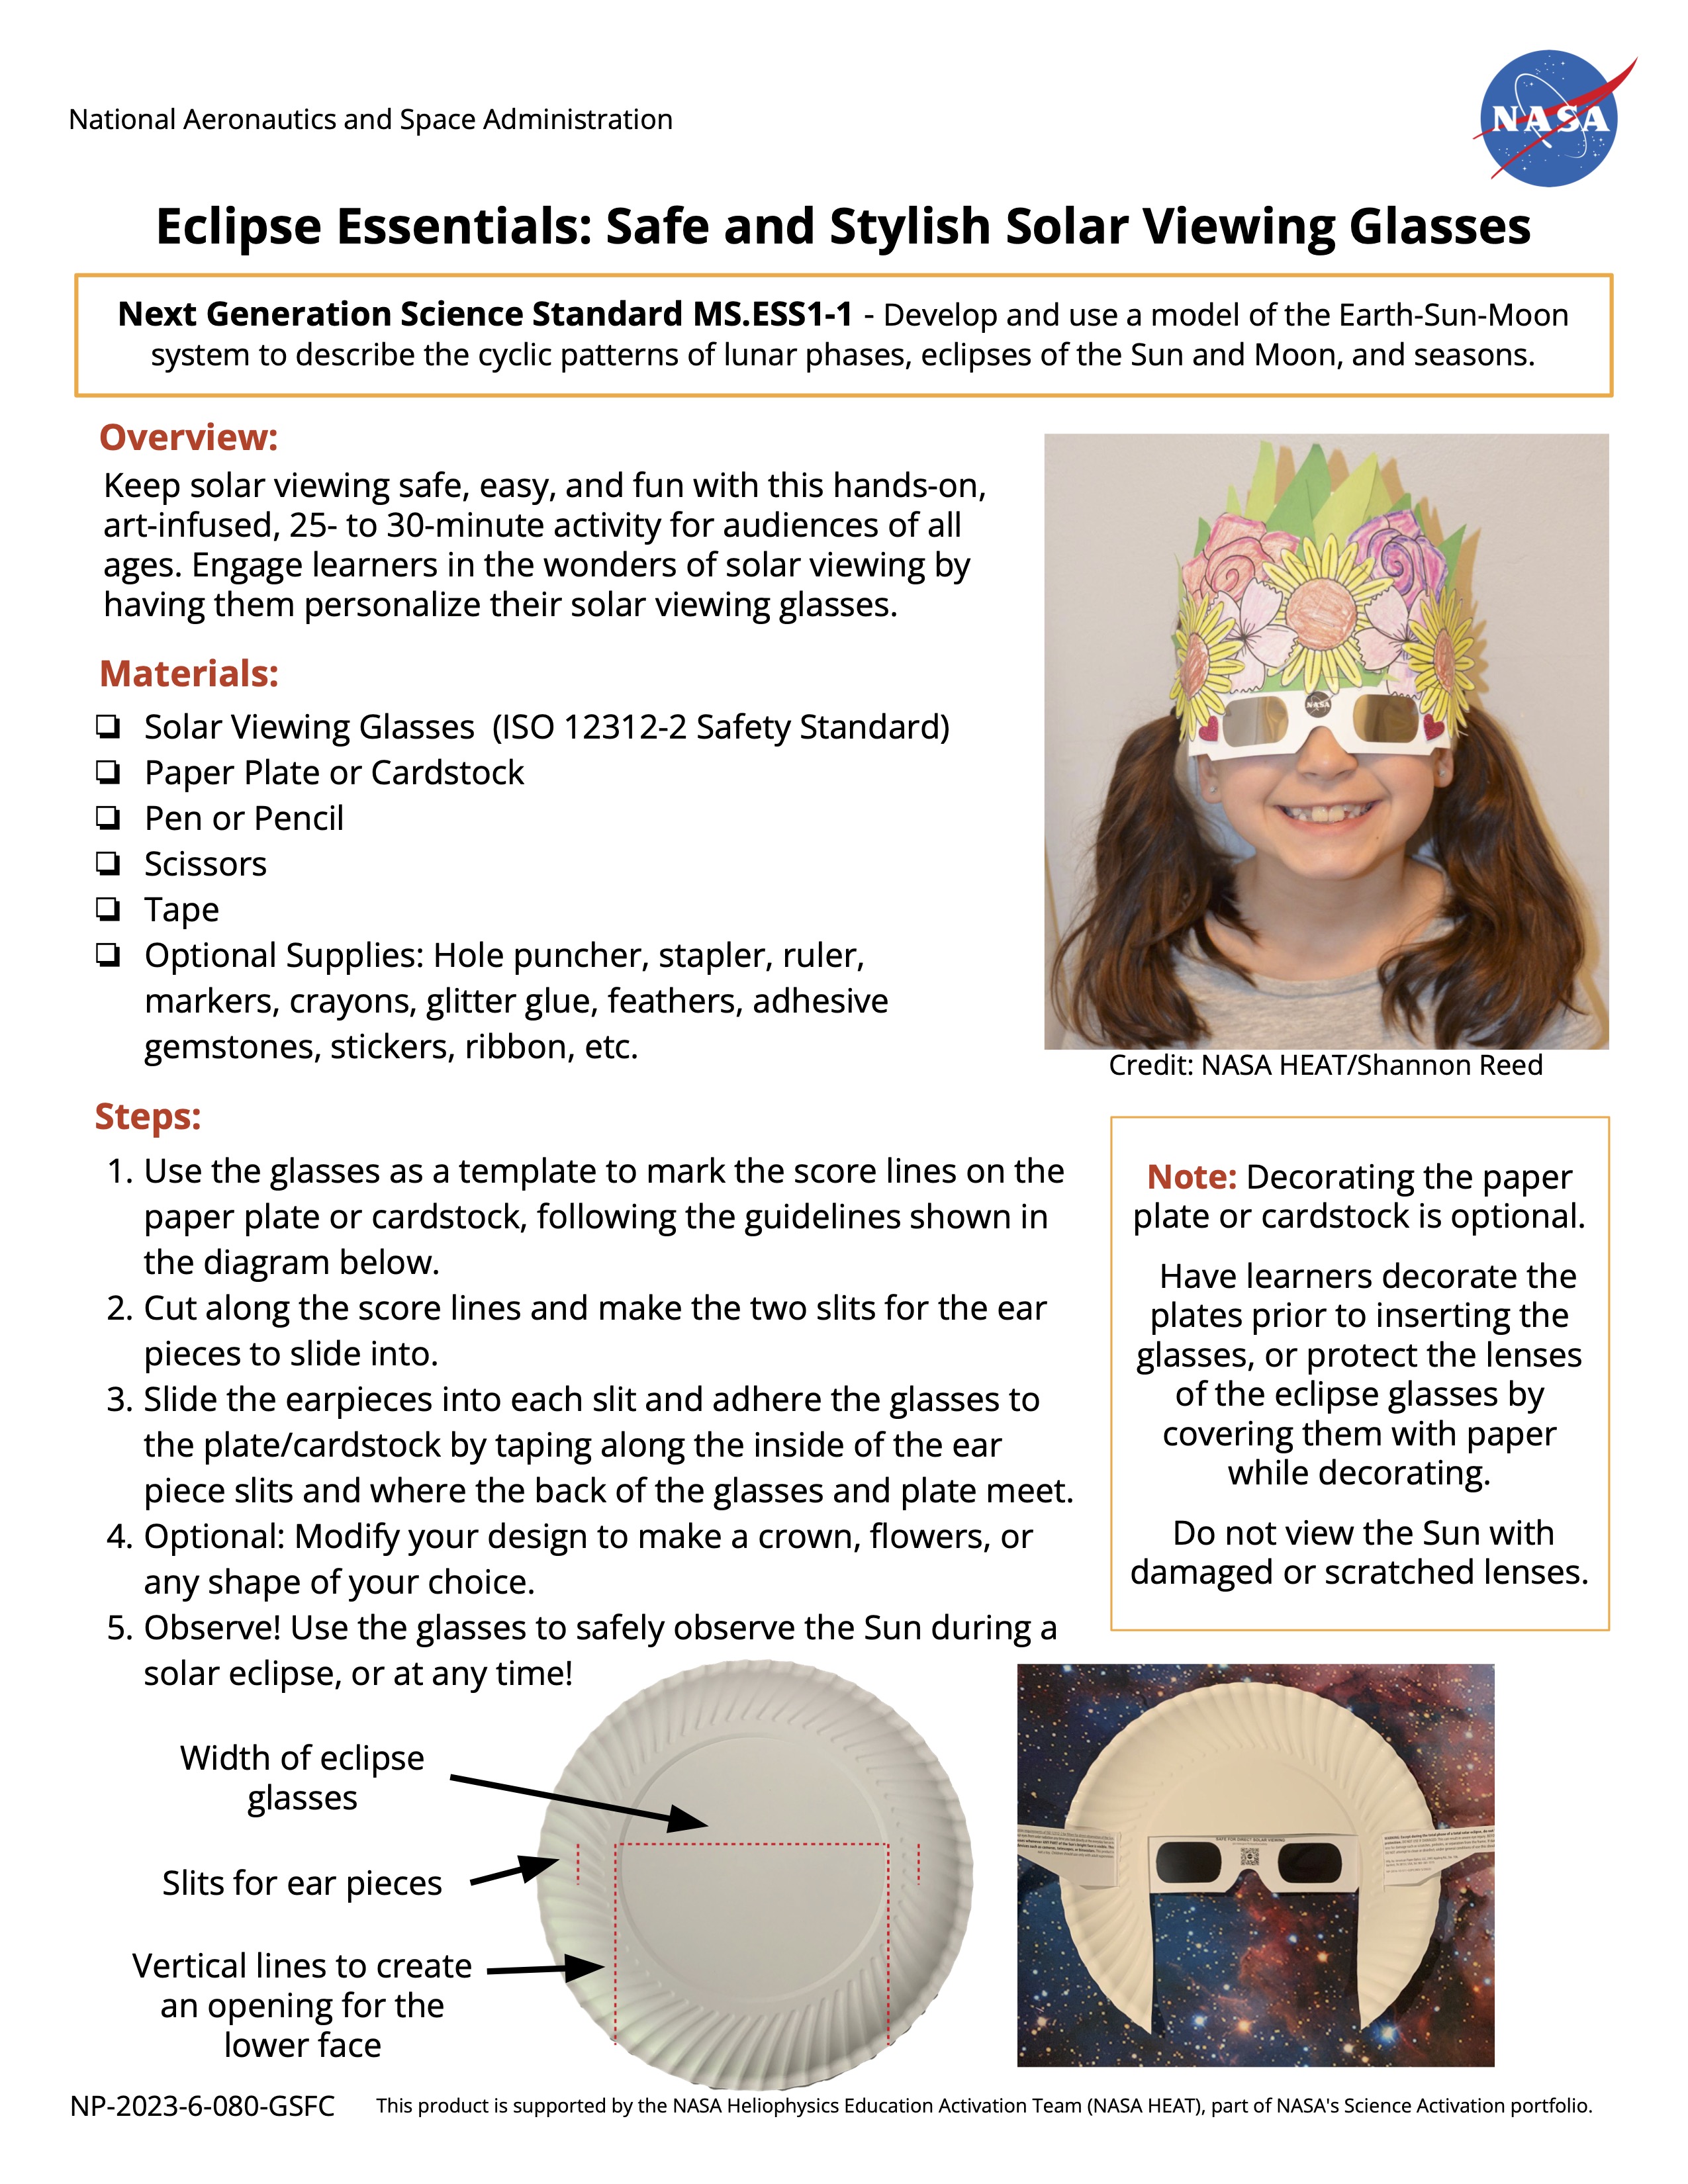 The activity sheet, showing an overview, materials needed, and steps to complete the activity. There is also a photo of a girl wearing eclipse glasses with a flower crown on top.